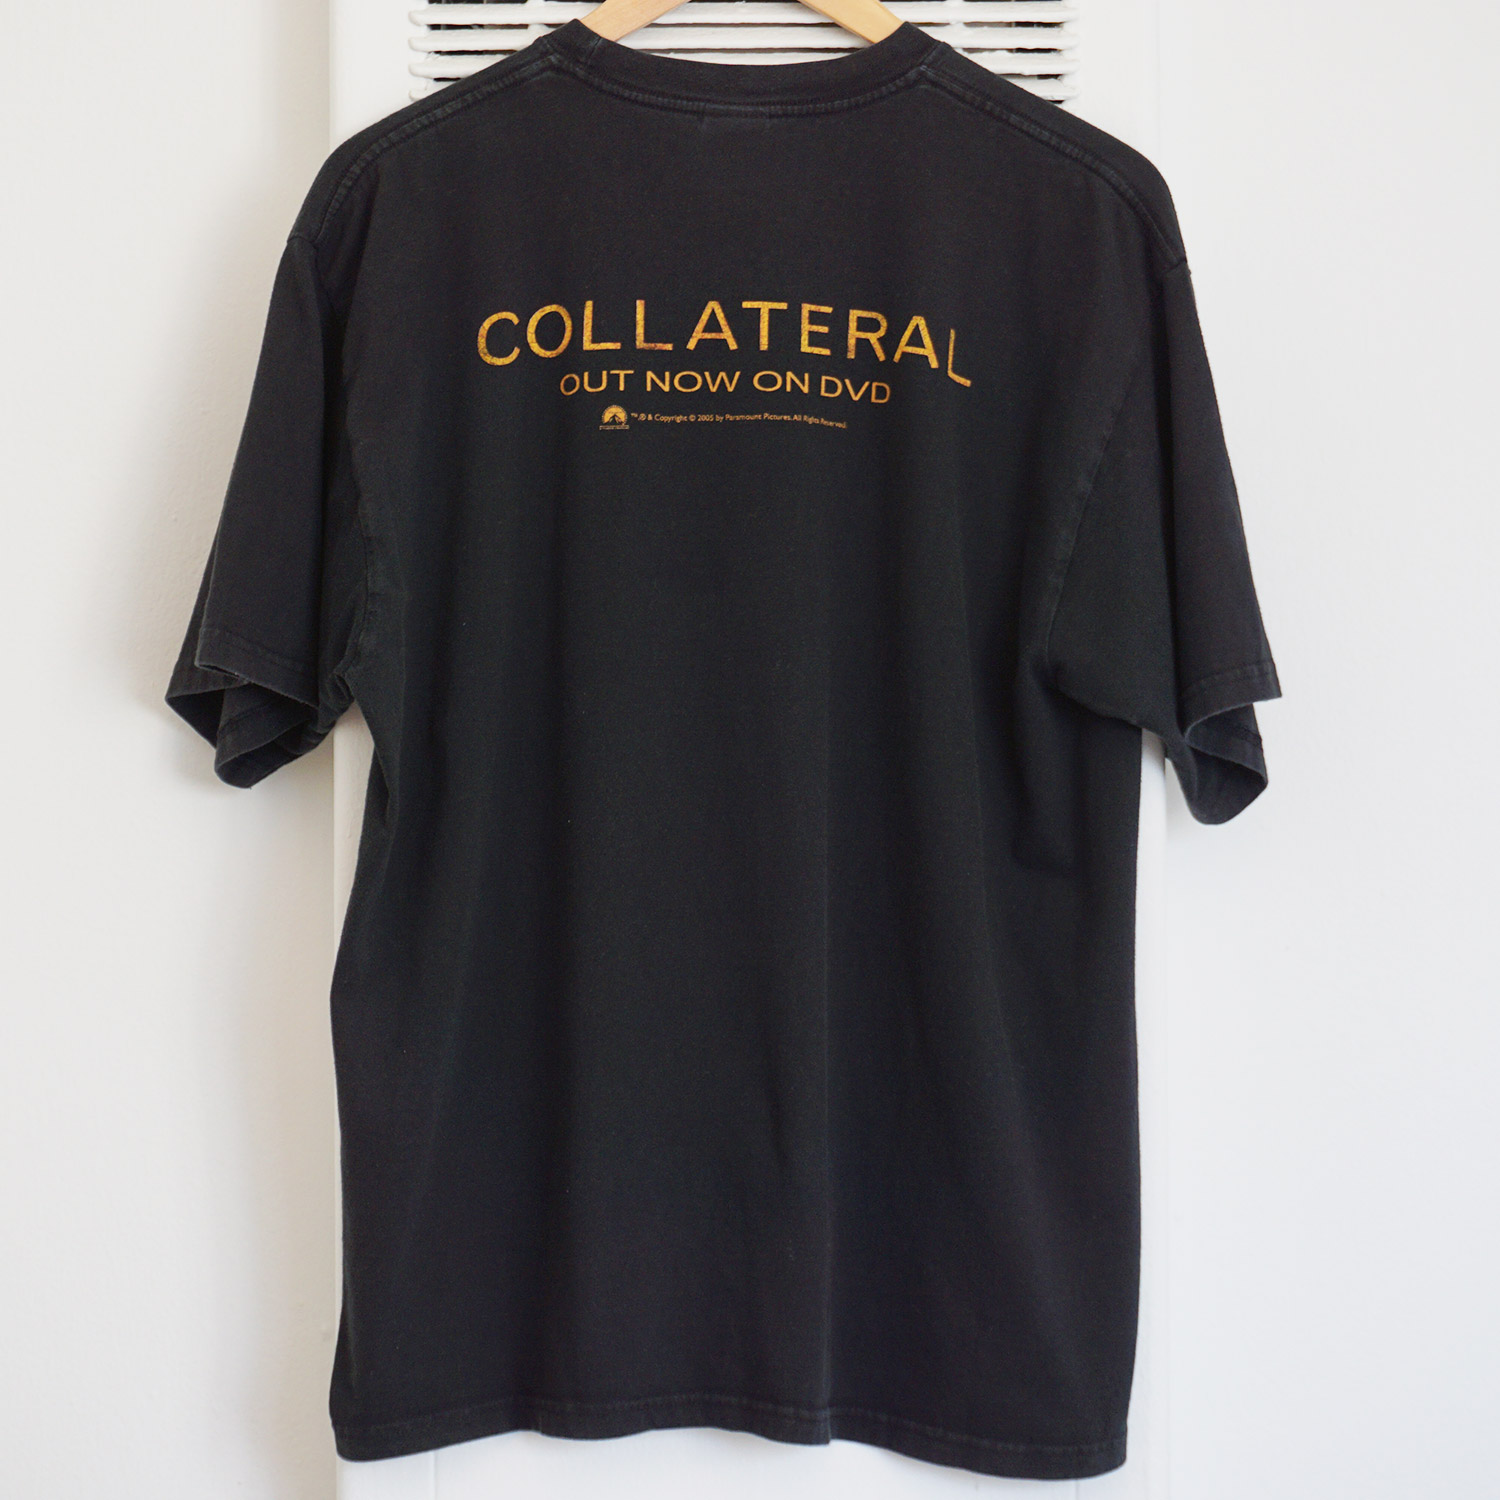 Vintage Collateral Movie T-shirt, Back